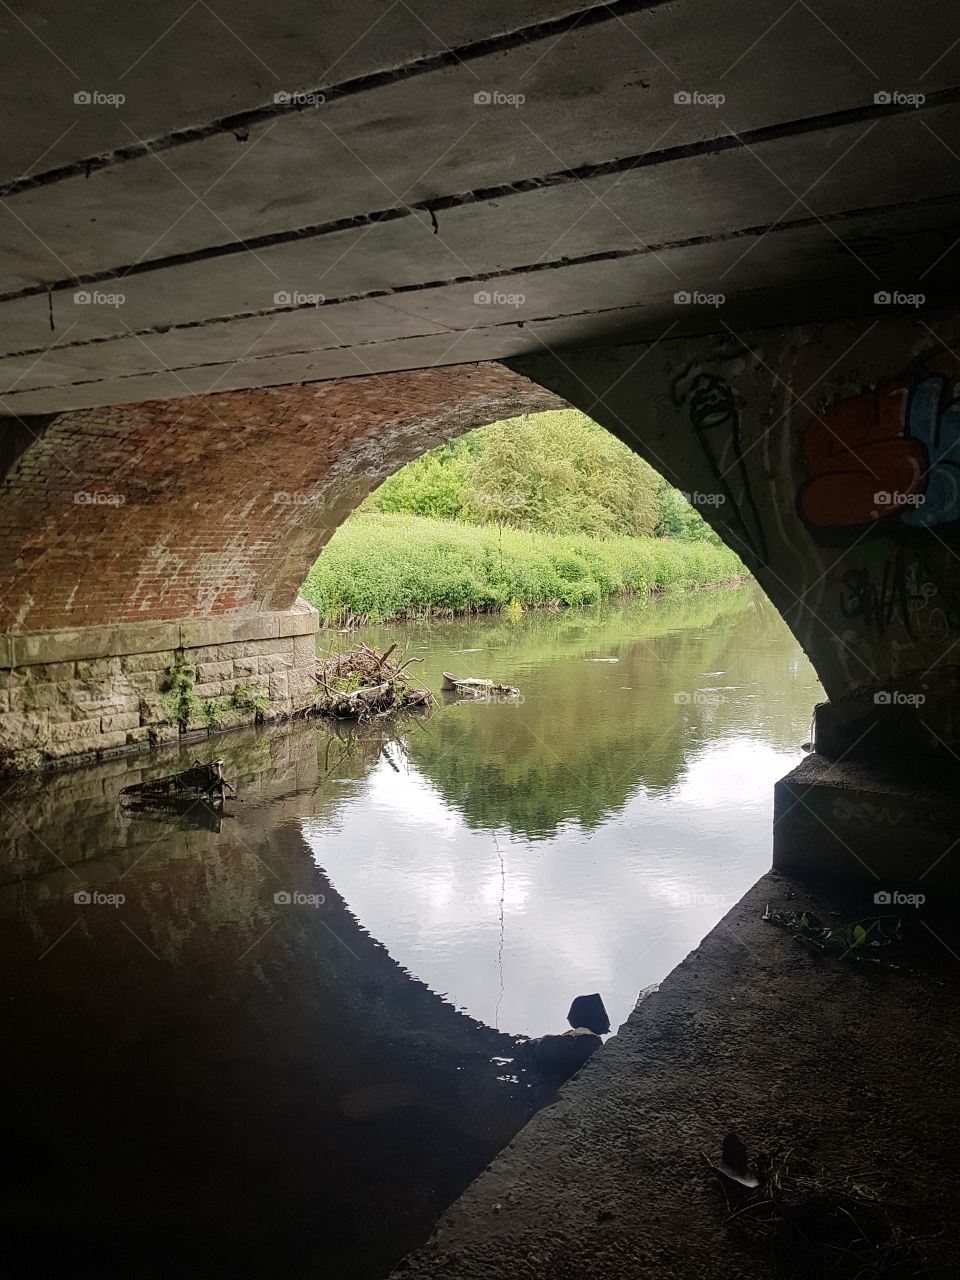 reflections on clear Crystal waters under a railway bridge